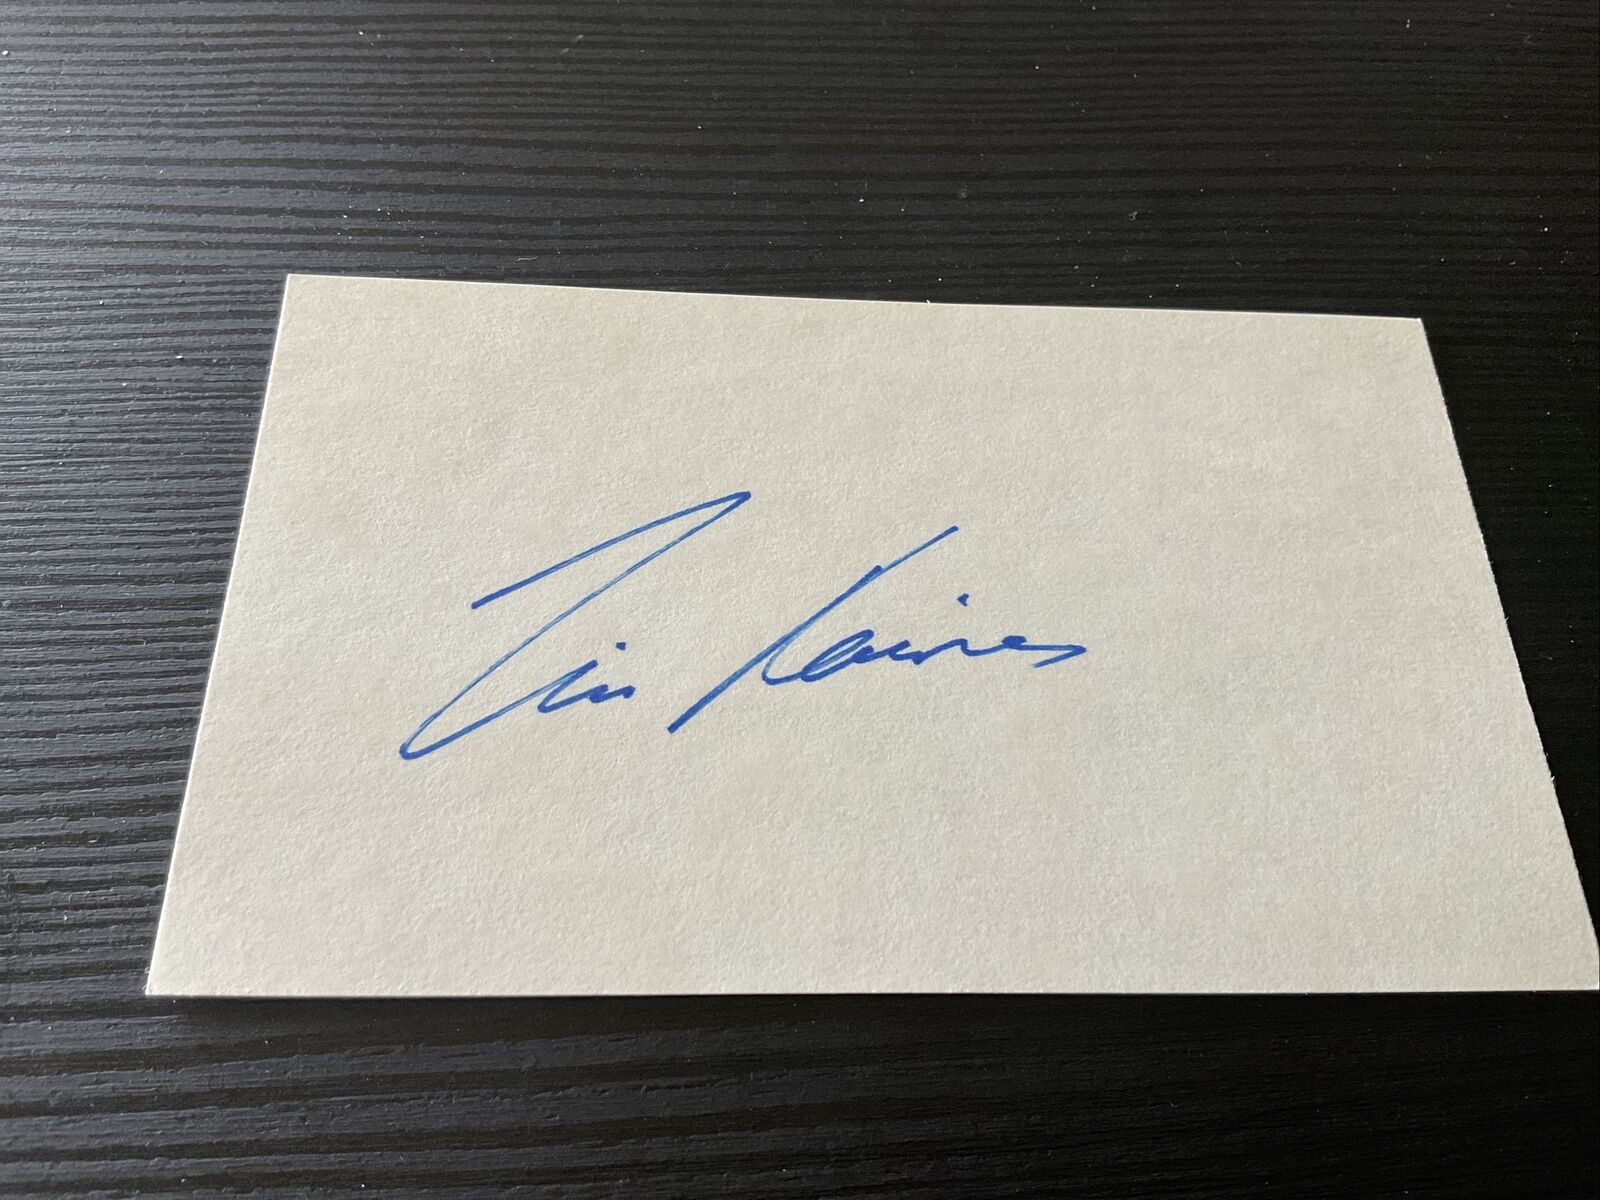 Tim Raines Signed Autographed 3x5 index card